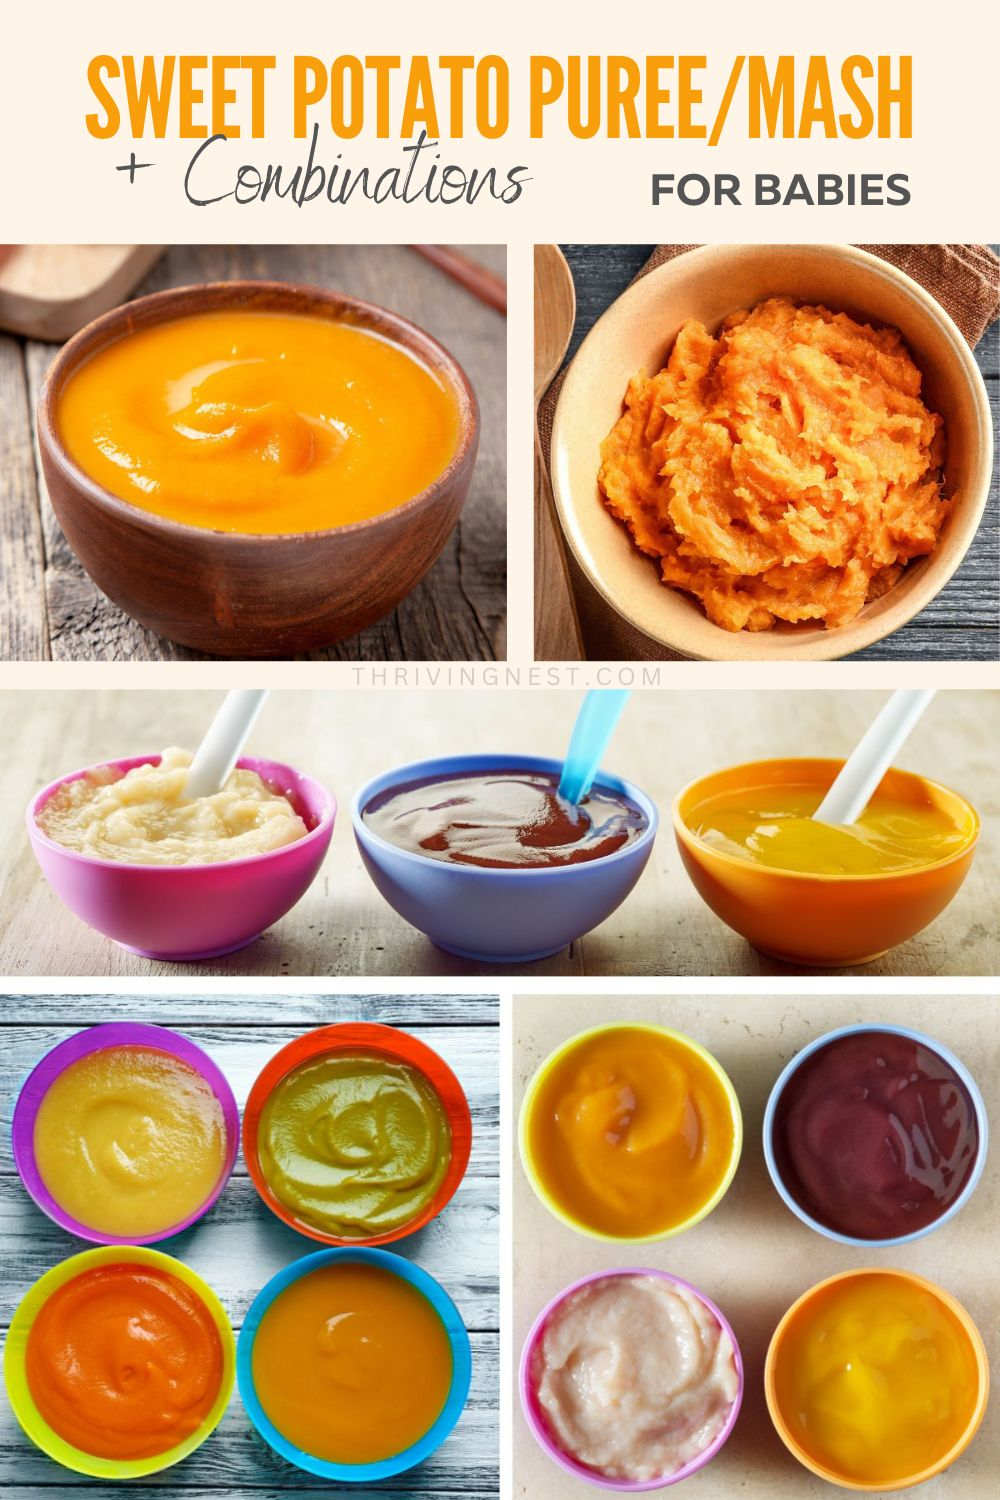 Sweet potato puree / mash for baby (6 months and up) + combinations baby food ideas for stage 1 and stage 2. #sweetpotato #puree #baby #stage1